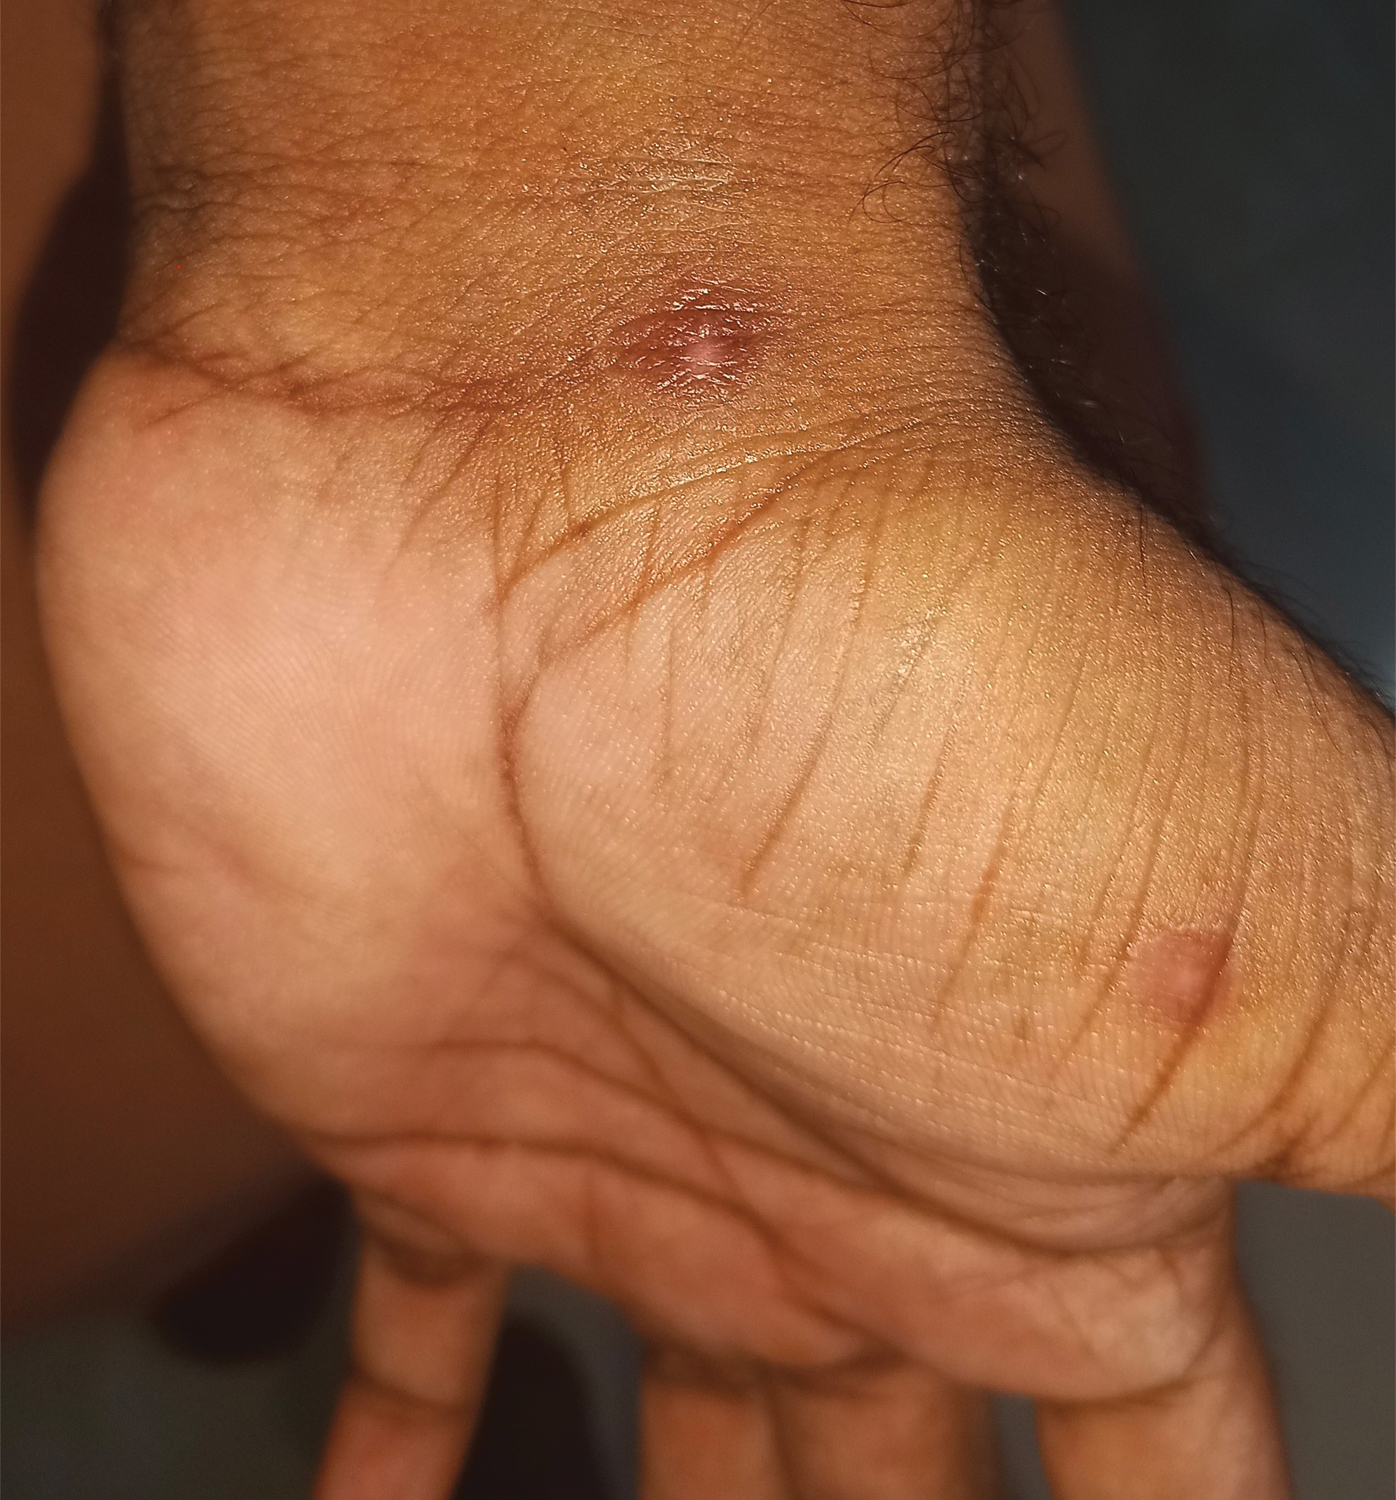 Monkeypox. Day-23. Healed lesion on palm, with central atrophy and hypopigmentation; peripheral hyperpigmentation